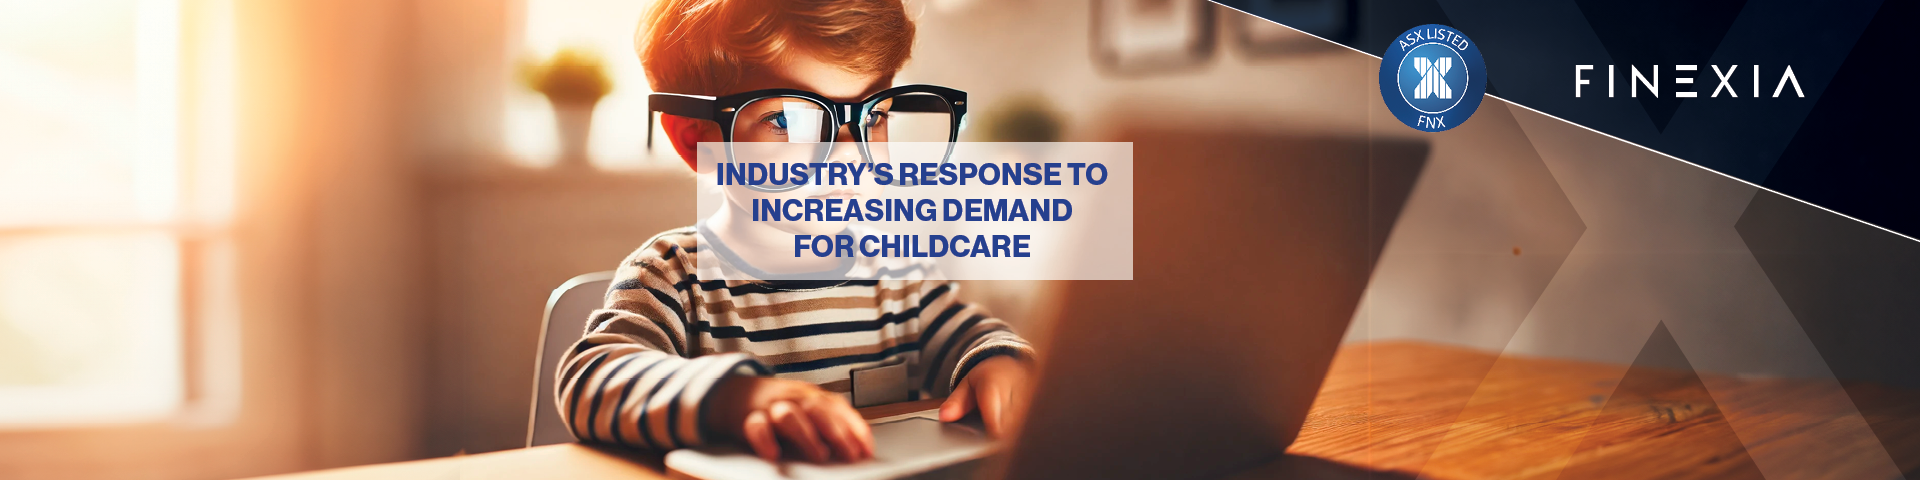 The Industry's Response to Increasing Demand for Childcare